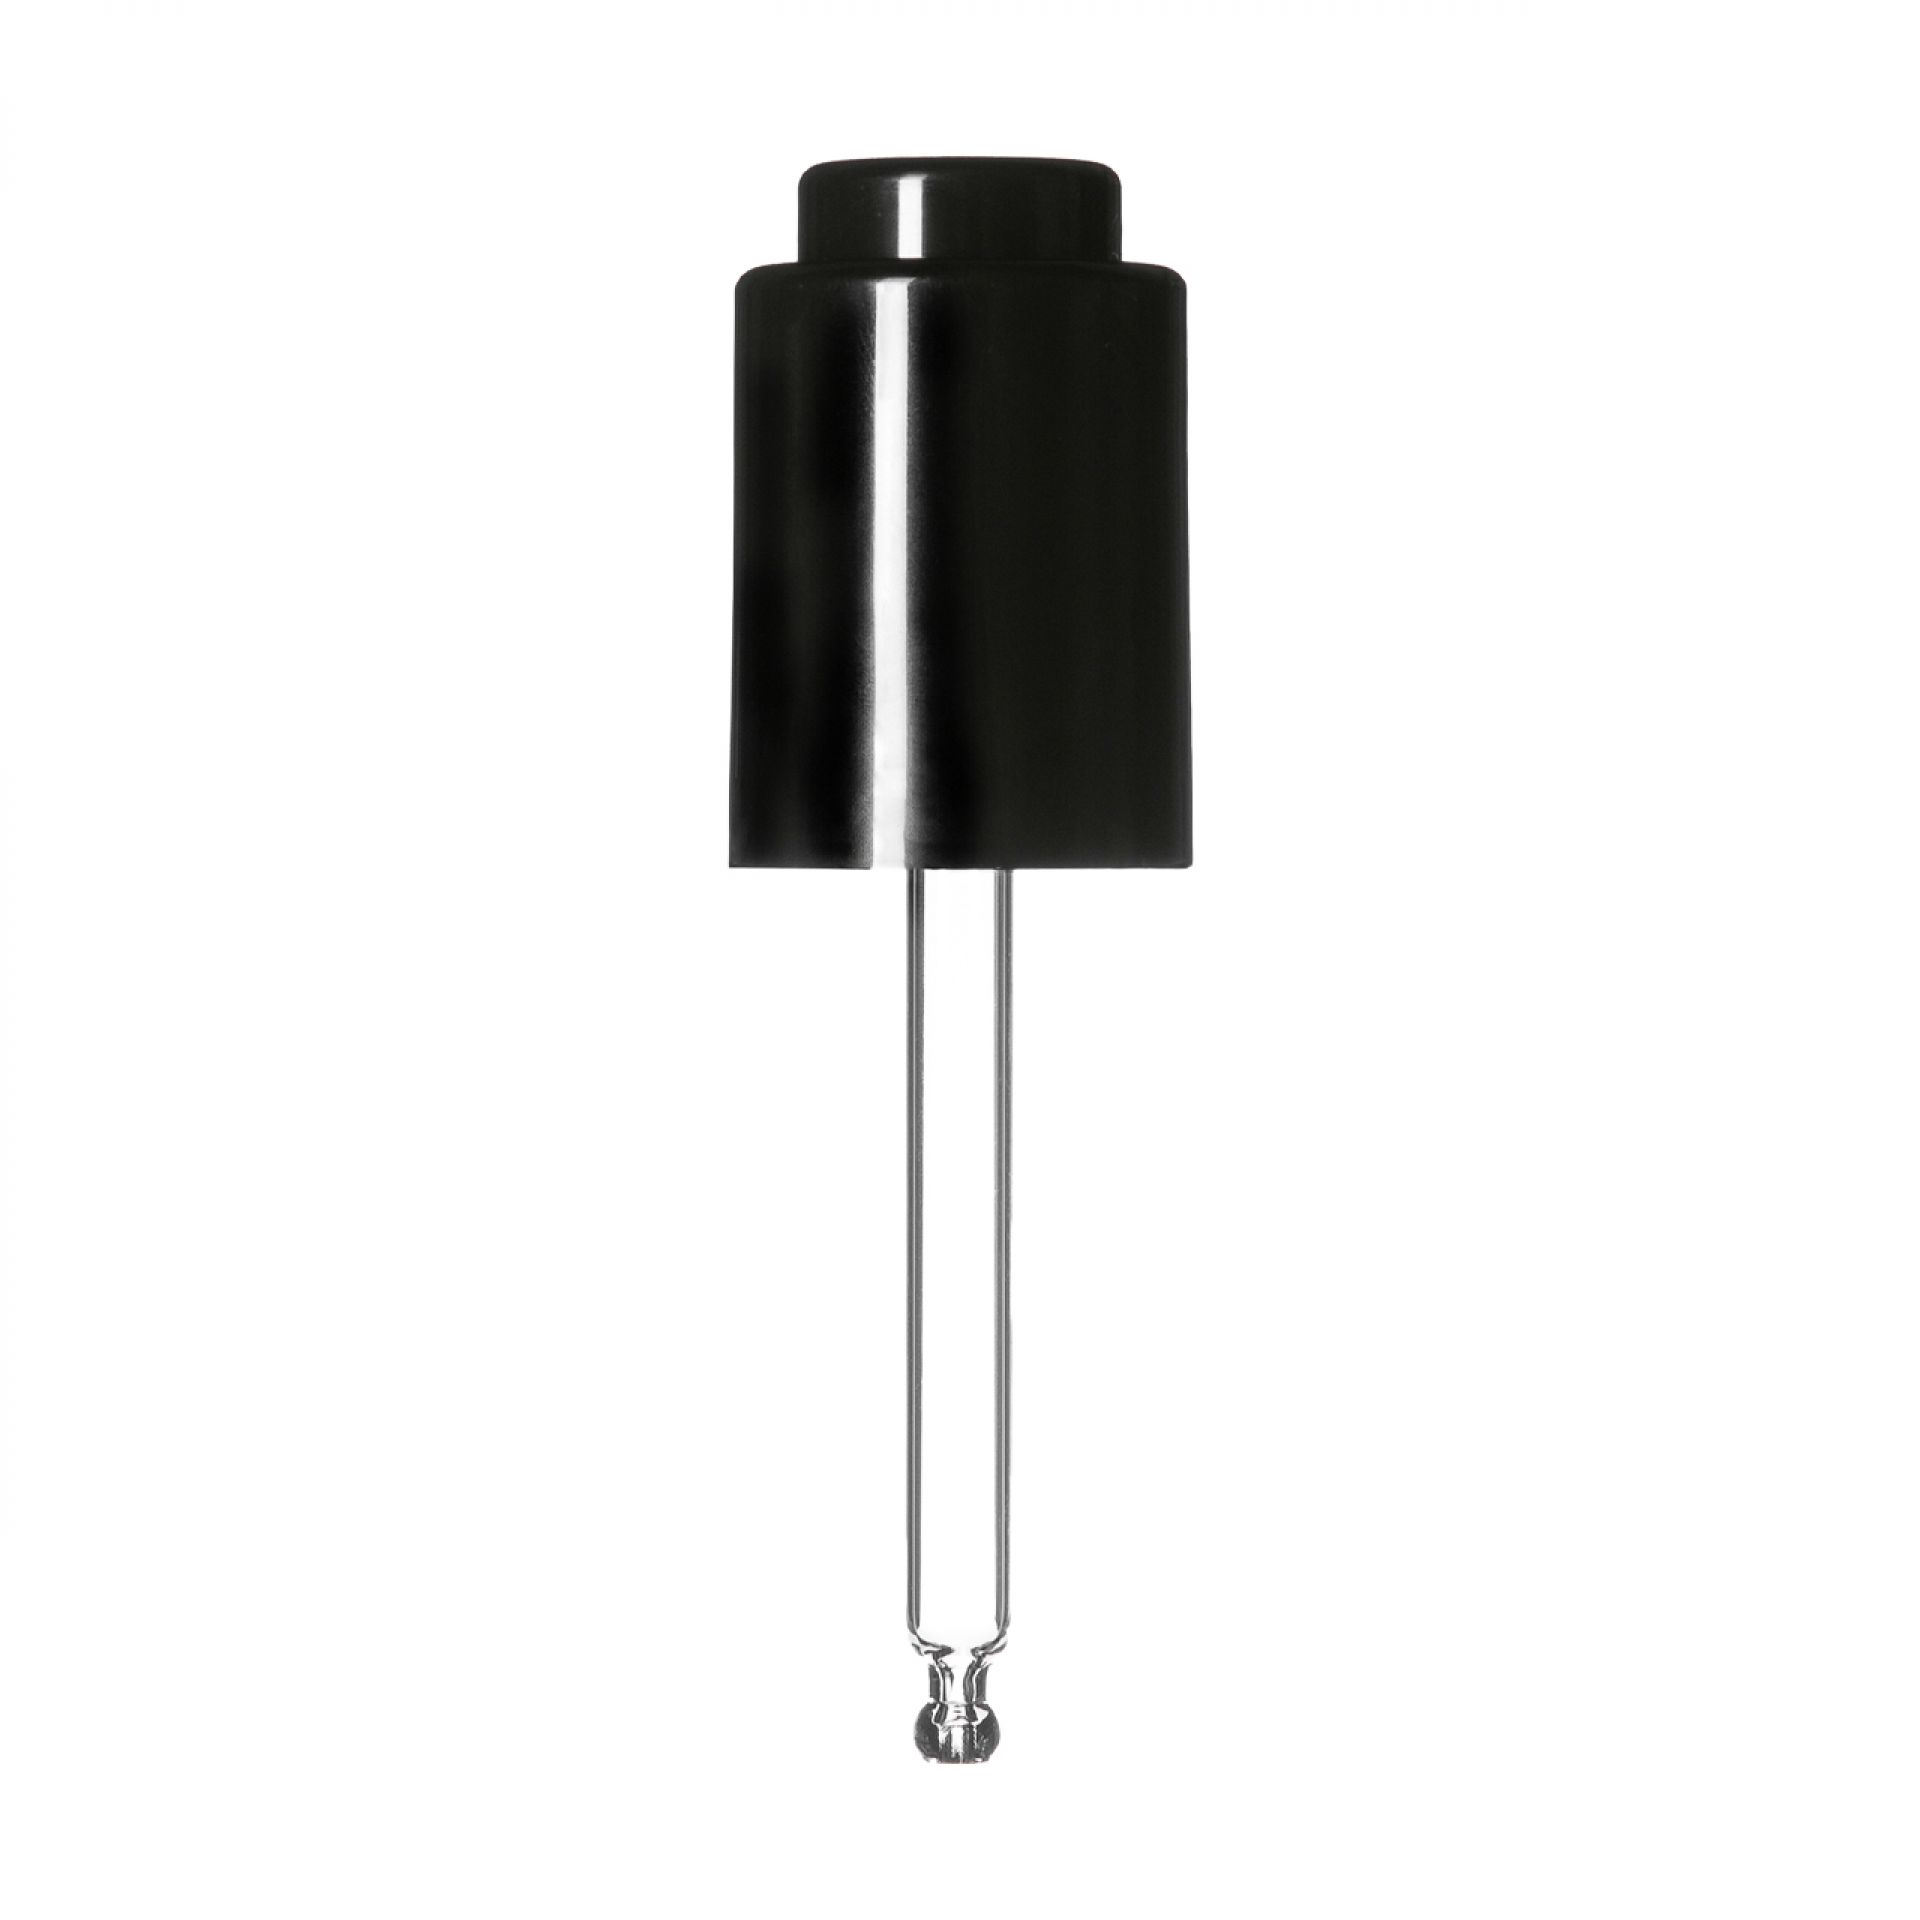 Push-button pipette 18/415, PP/ABS, black glossy finish, black button bulb Nitrile 0.4 ml, ball tip, straight for Laurel 30 ml